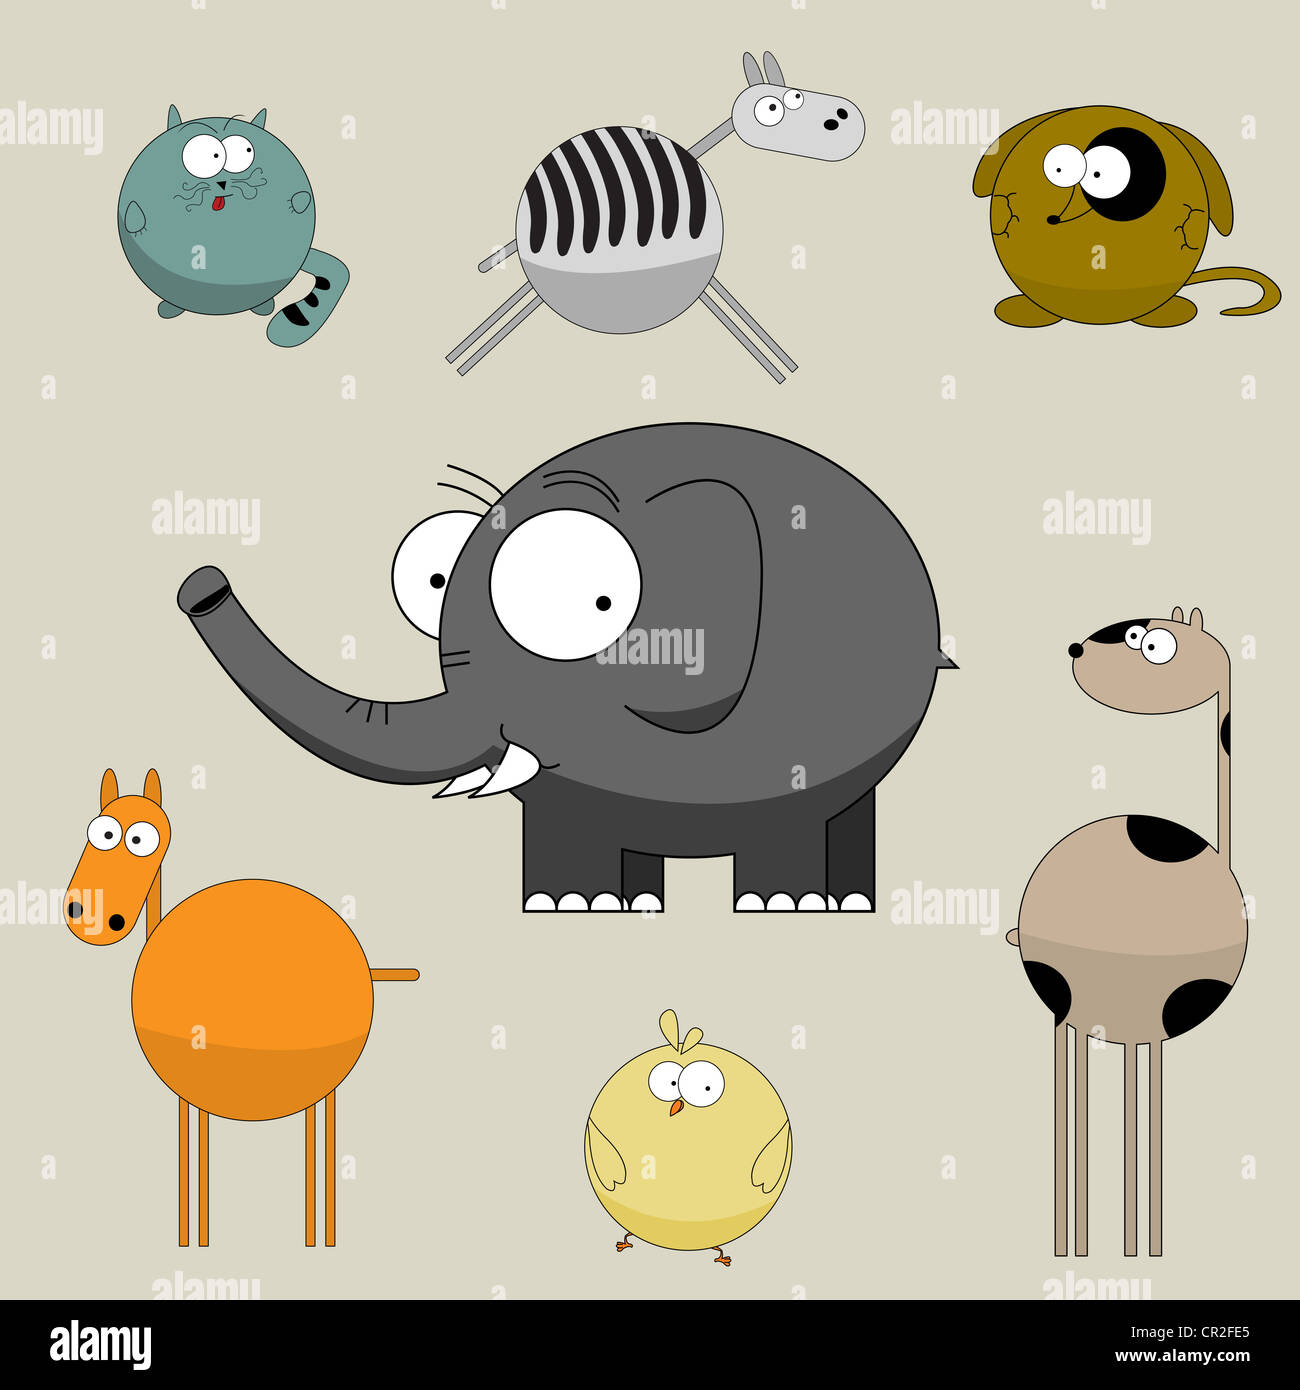 Funny cartoon animals collection, graphic art Stock Photo